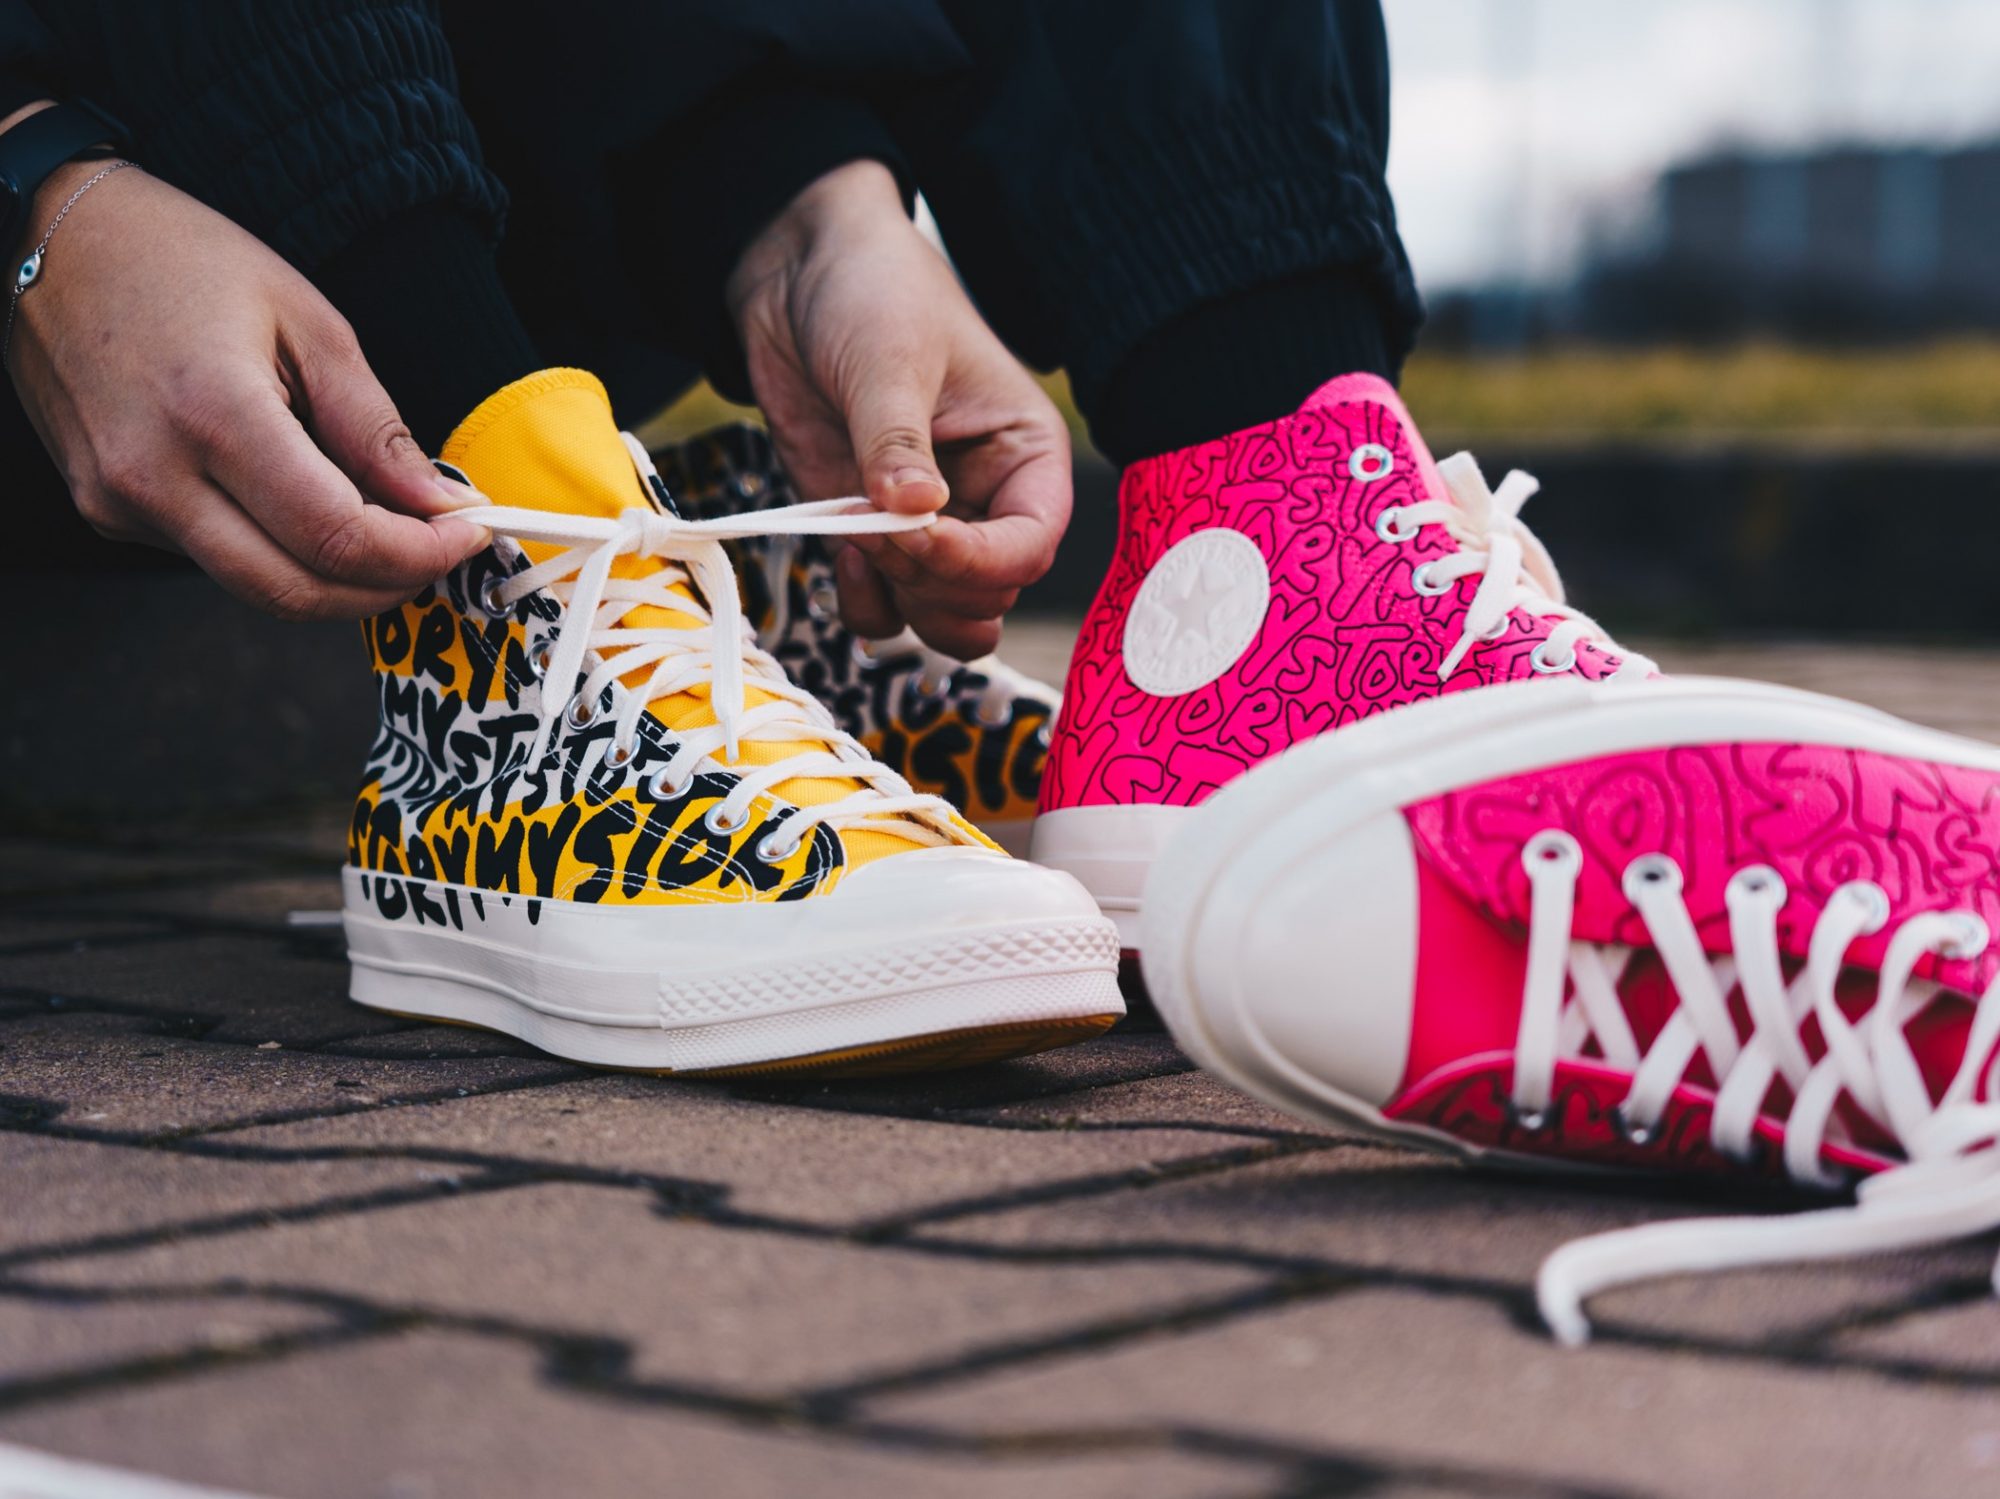 Justicia Abastecer Agricultura The new women's Converse collection My Story tells yours, too | FTSHP blog